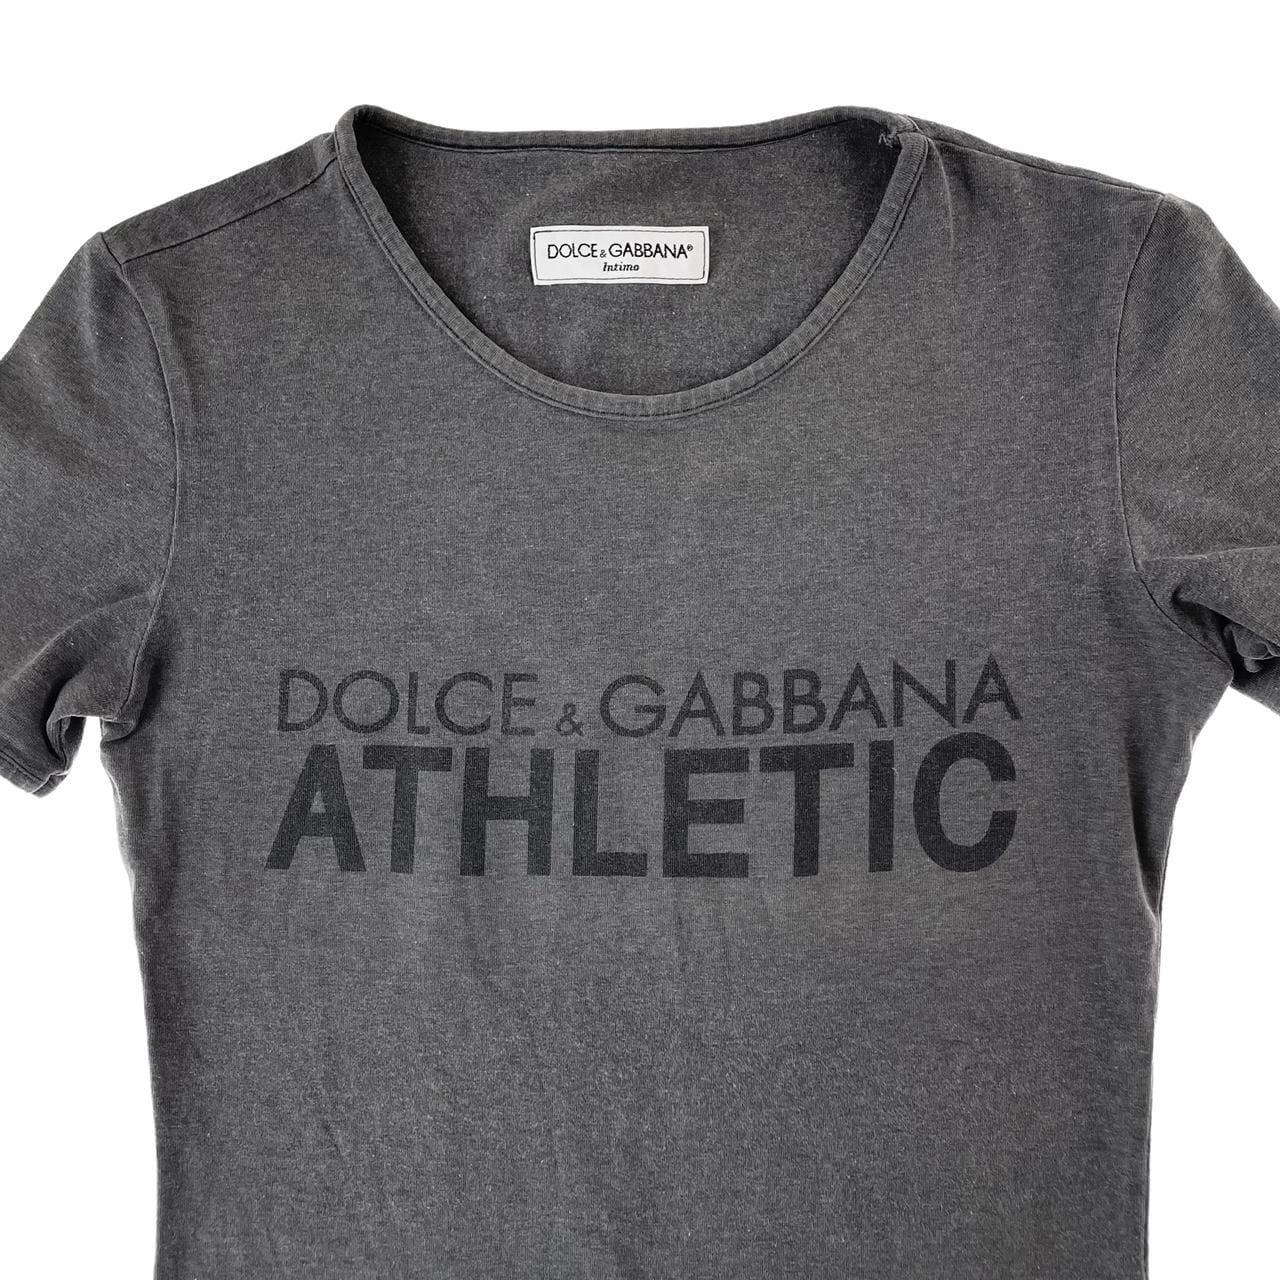 Vintage Dolce and Gabbana athletics t shirt woman’s size S - Known Source